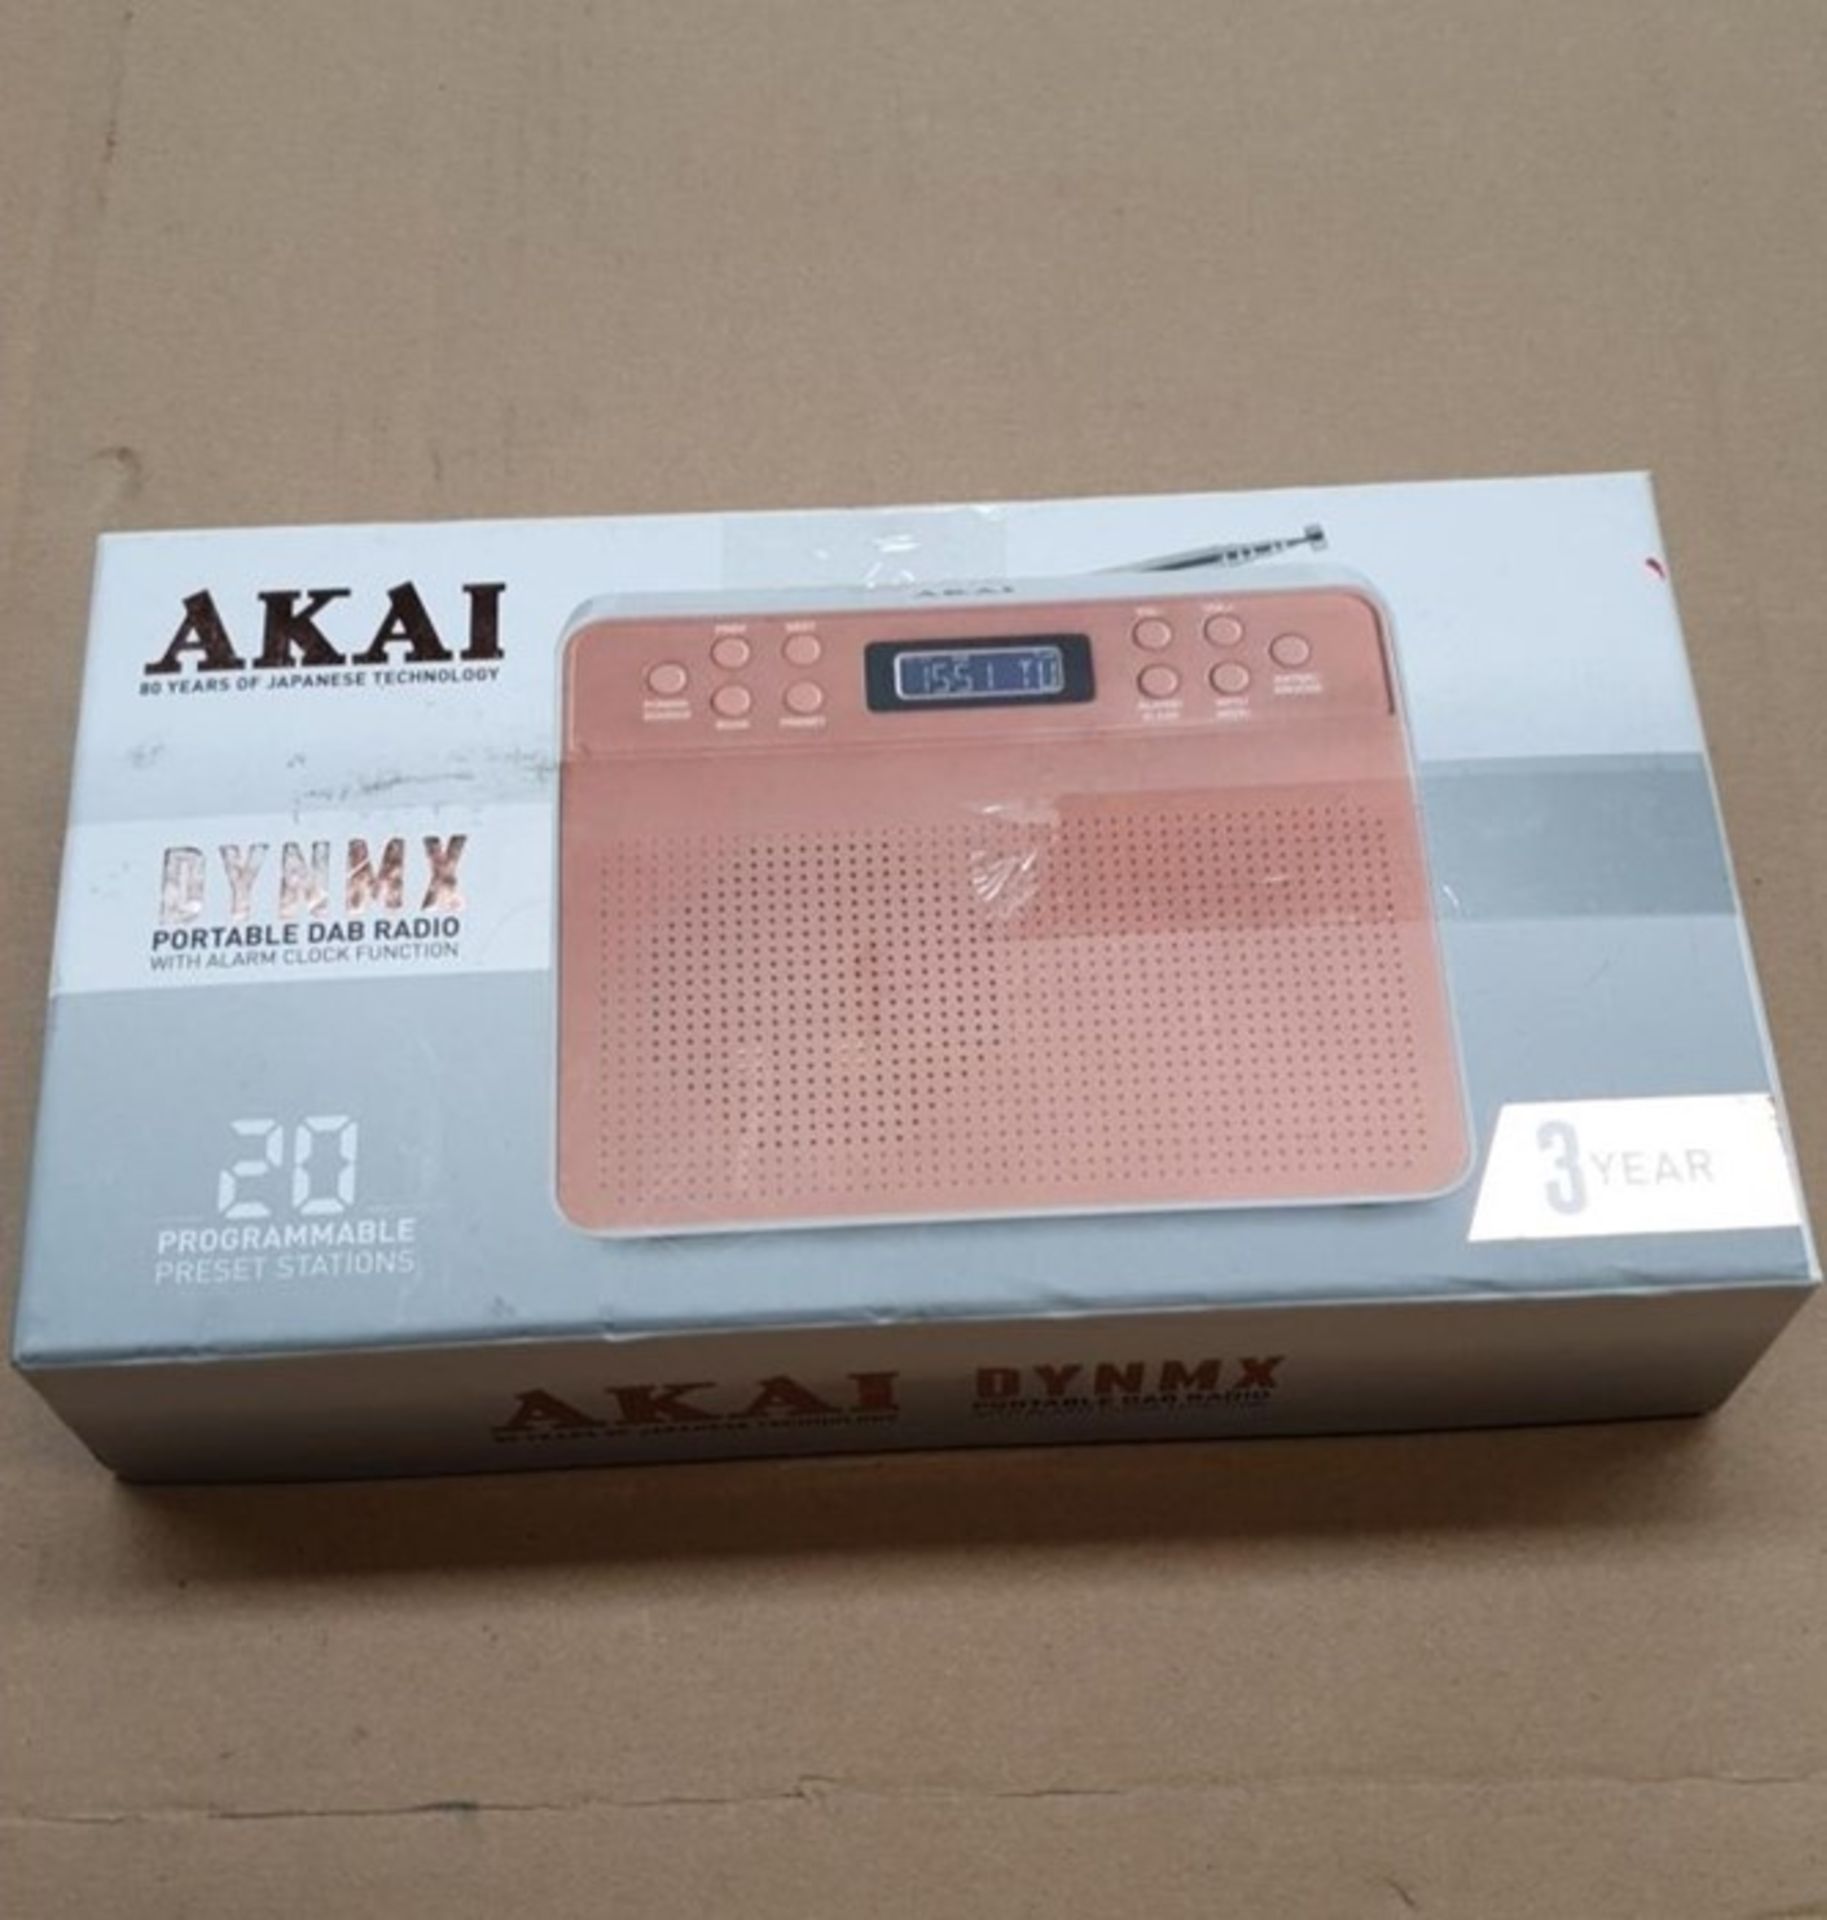 1 BOXED AKAI RETRO PORTABLE DYNMX DAB RADIO IN ROSE GOLD AND WHITE / BL - 5615 / RRP £30.00 (VIEWING